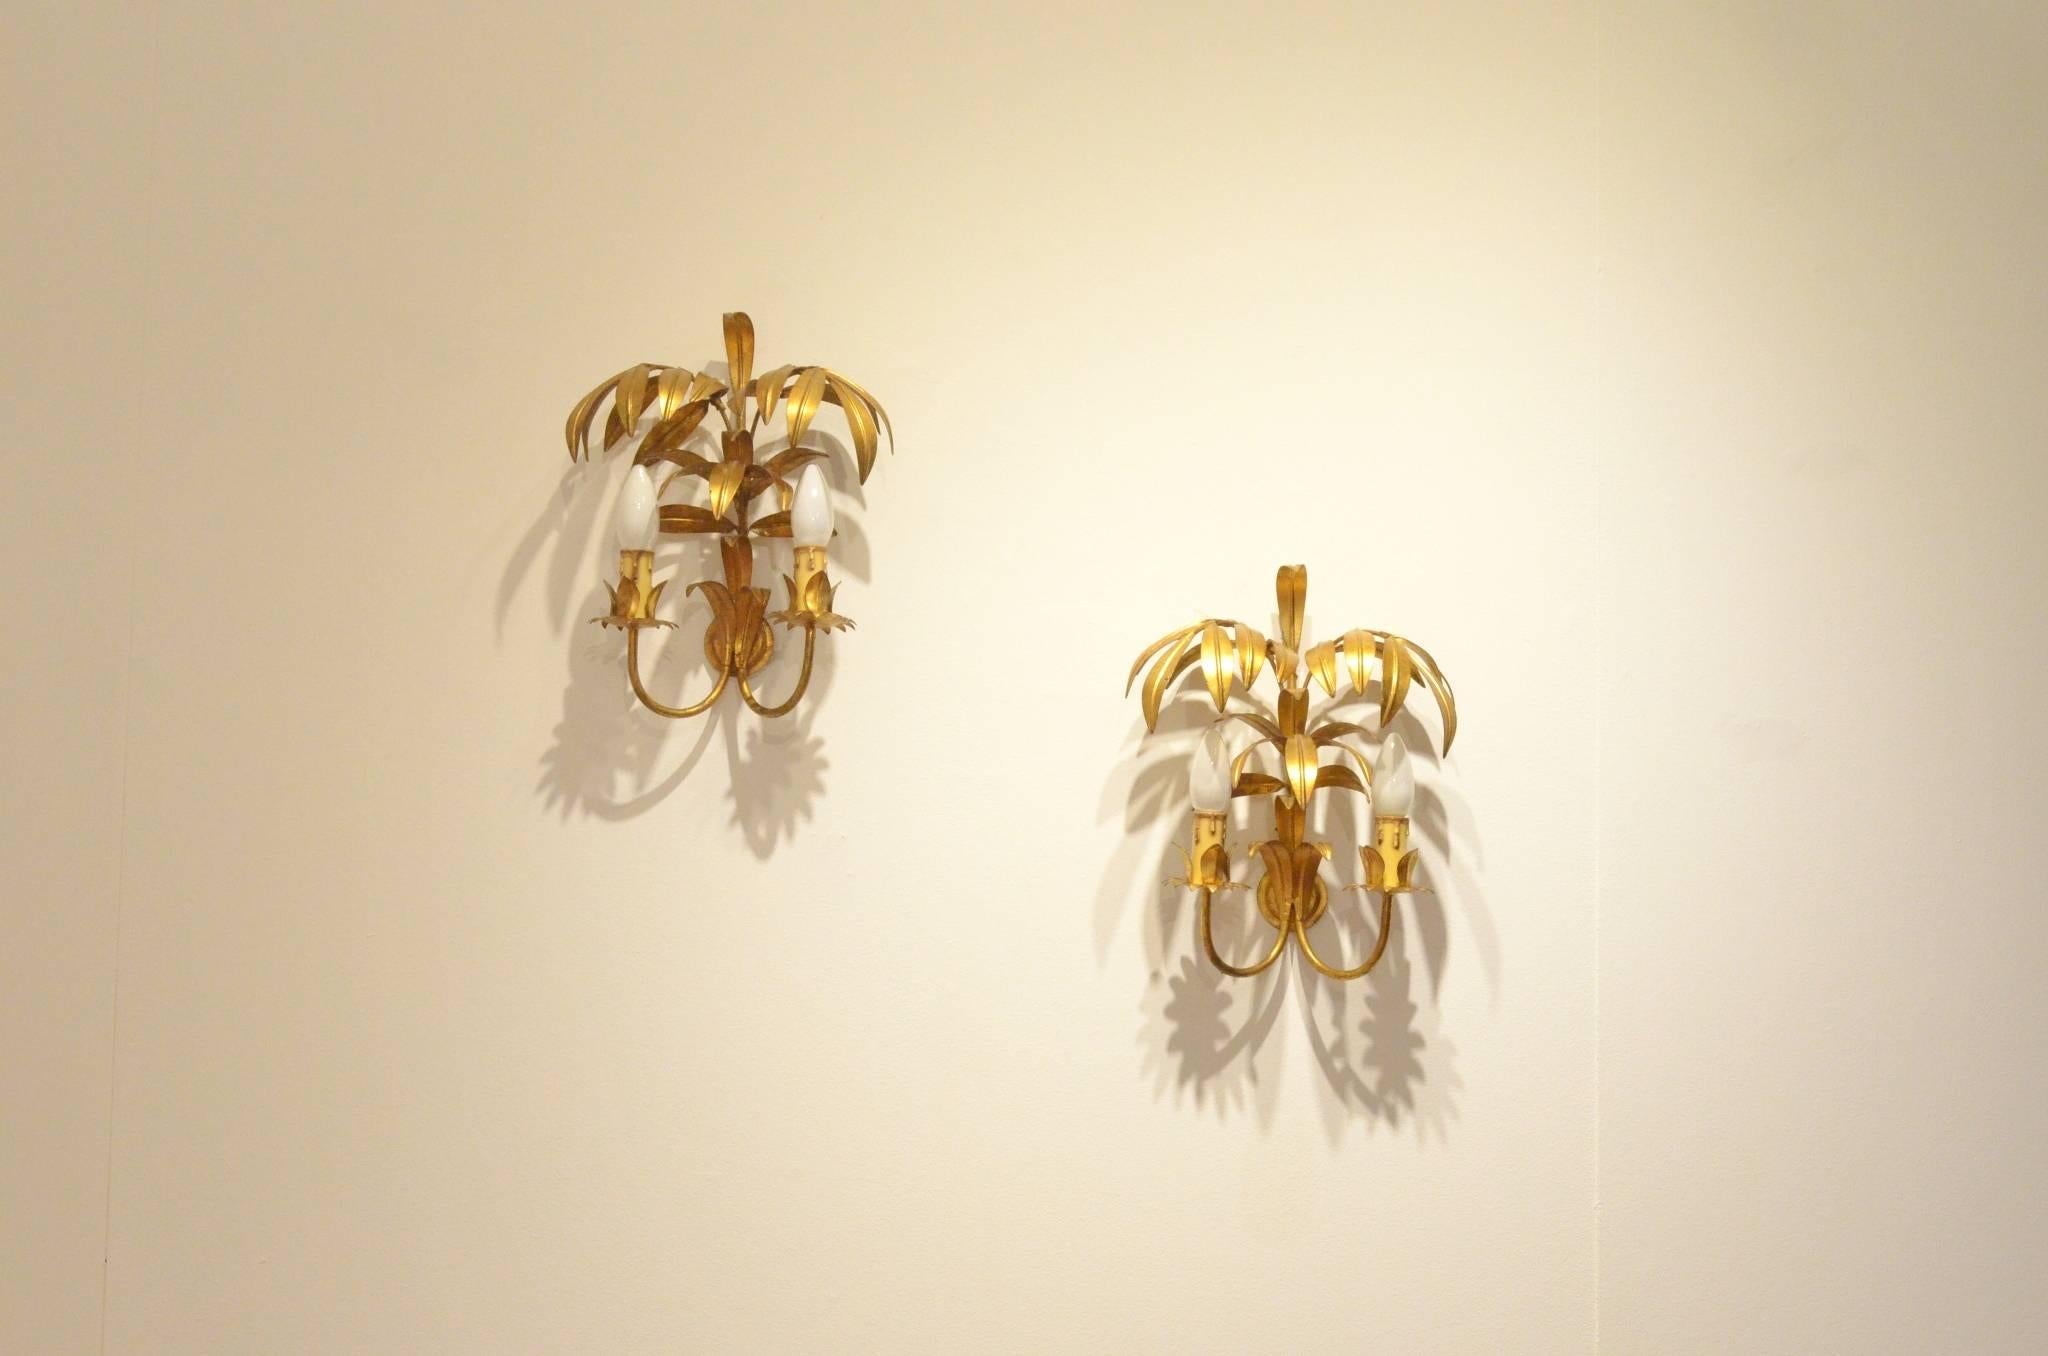 Set of two French 1950s wall sconces made of golden iron representing palm tree leaves.